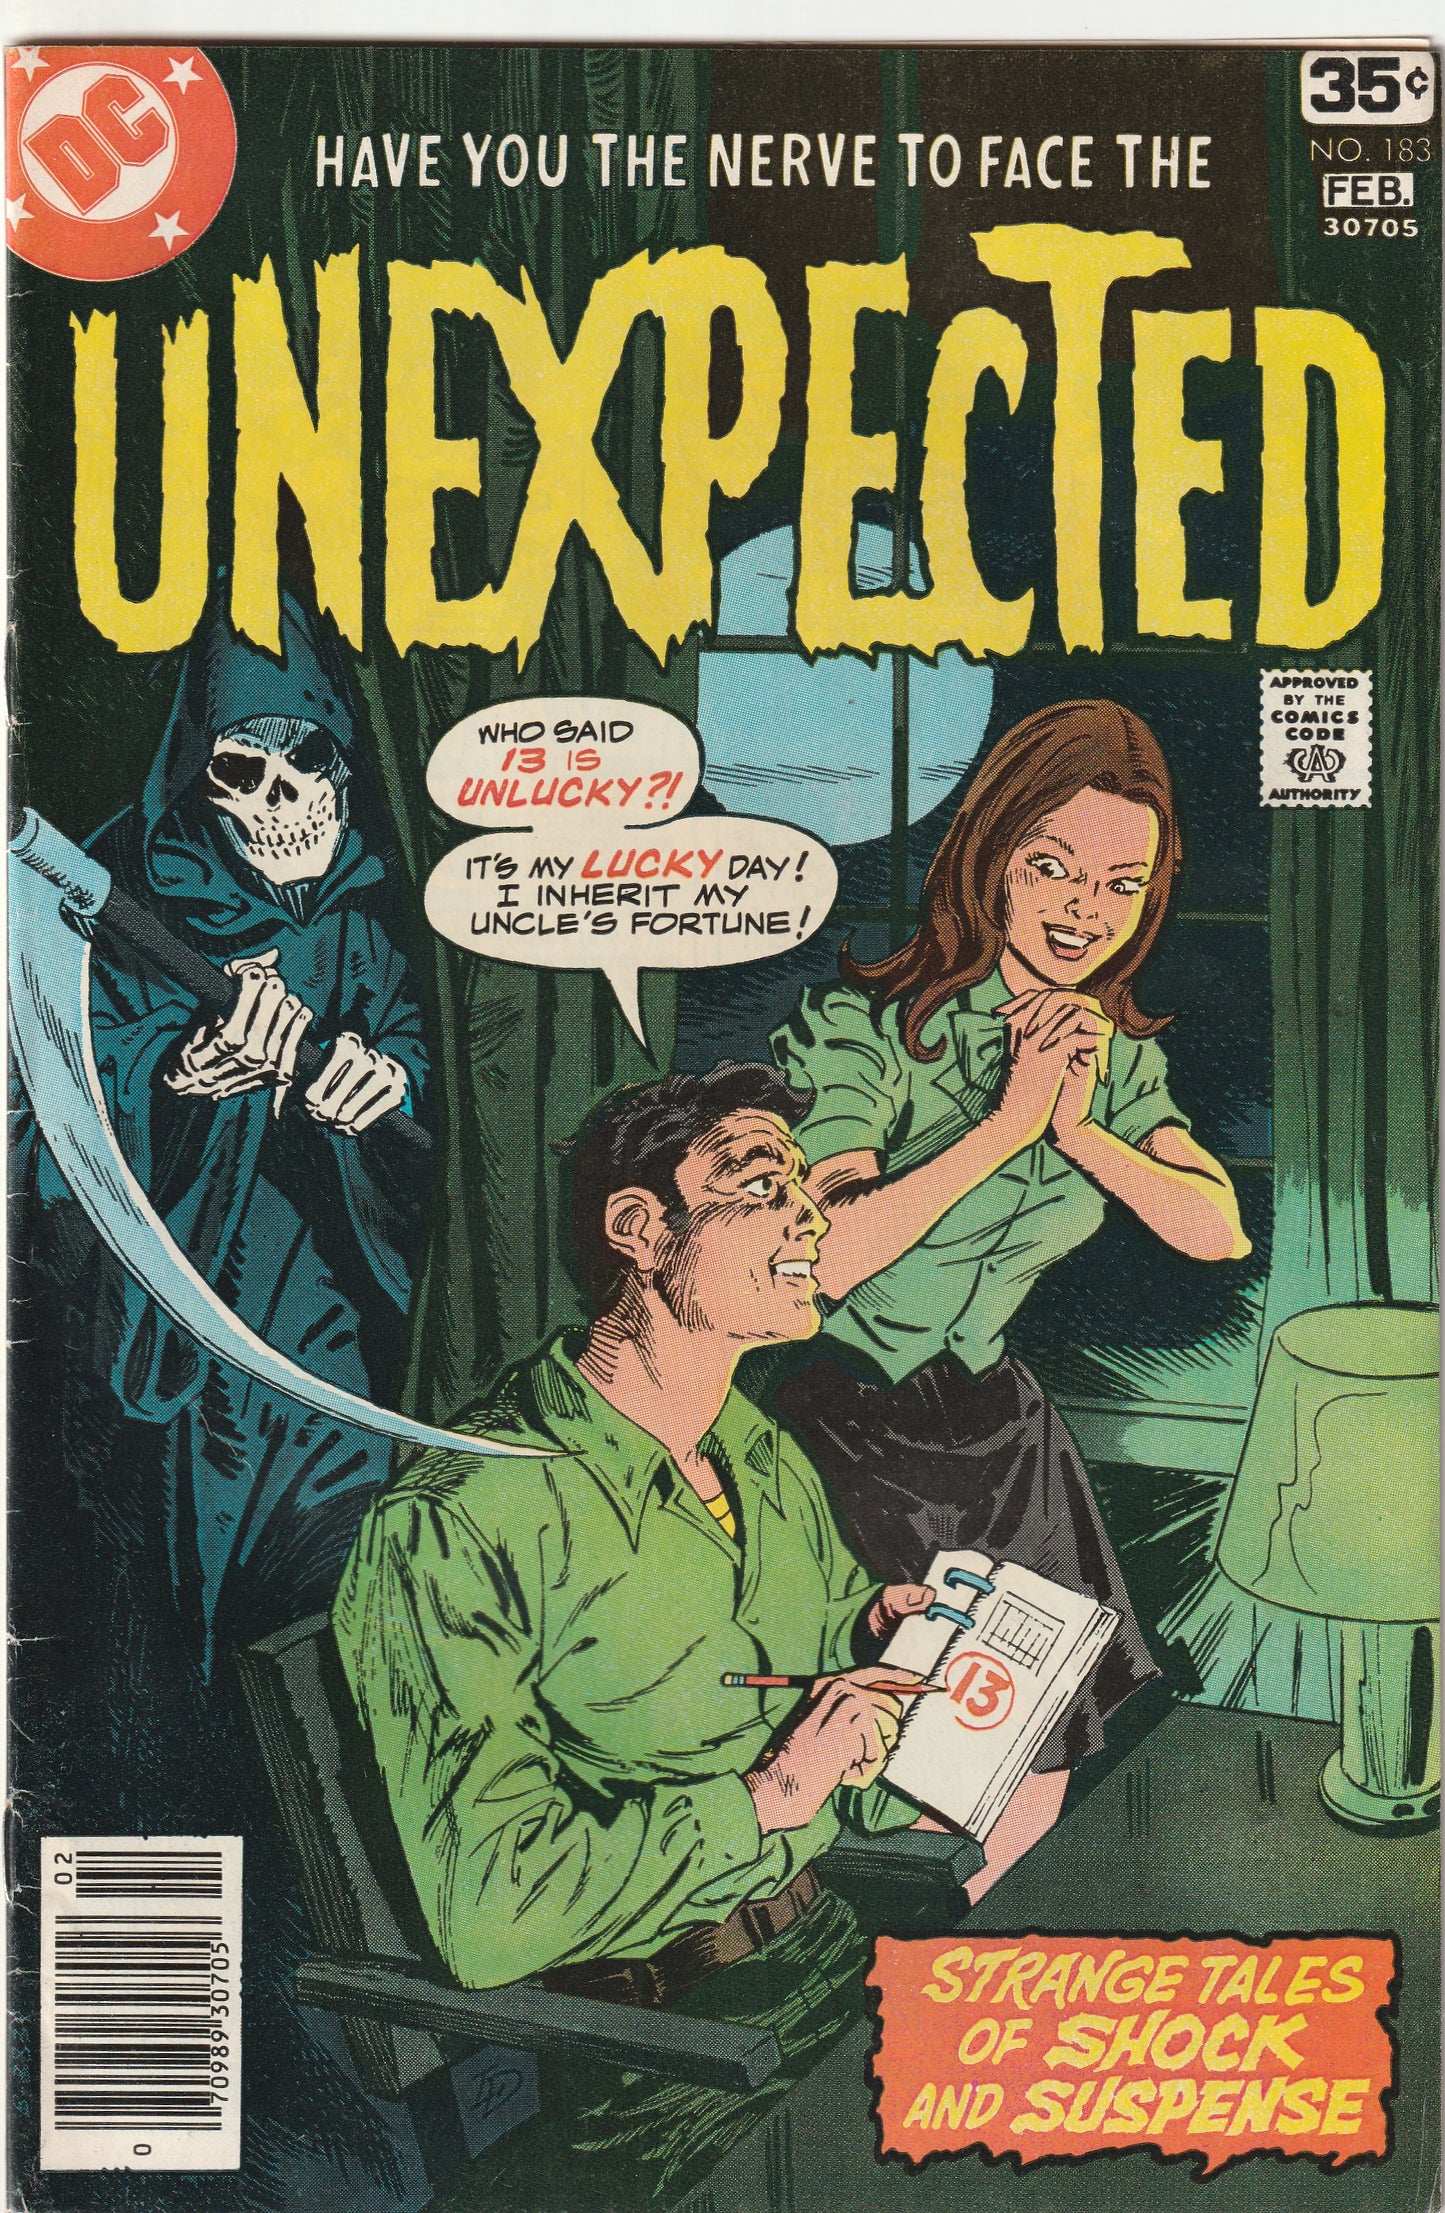 Unexpected #183 (1978)